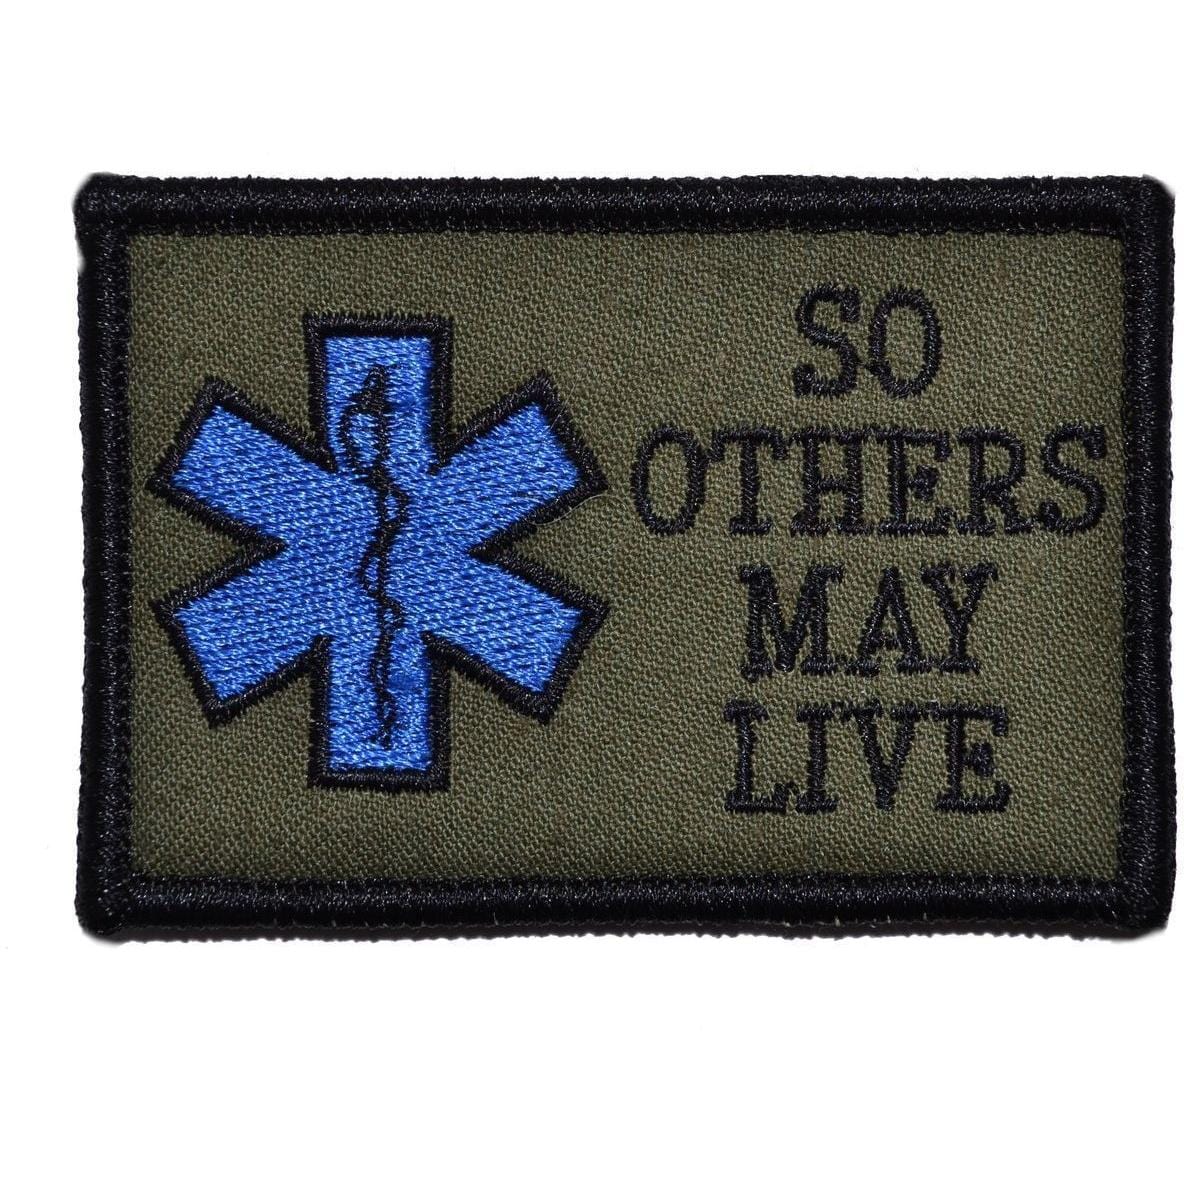 Tactical Gear Junkie Patches Olive Drab EMS So Others May Live - 2x3 Patch